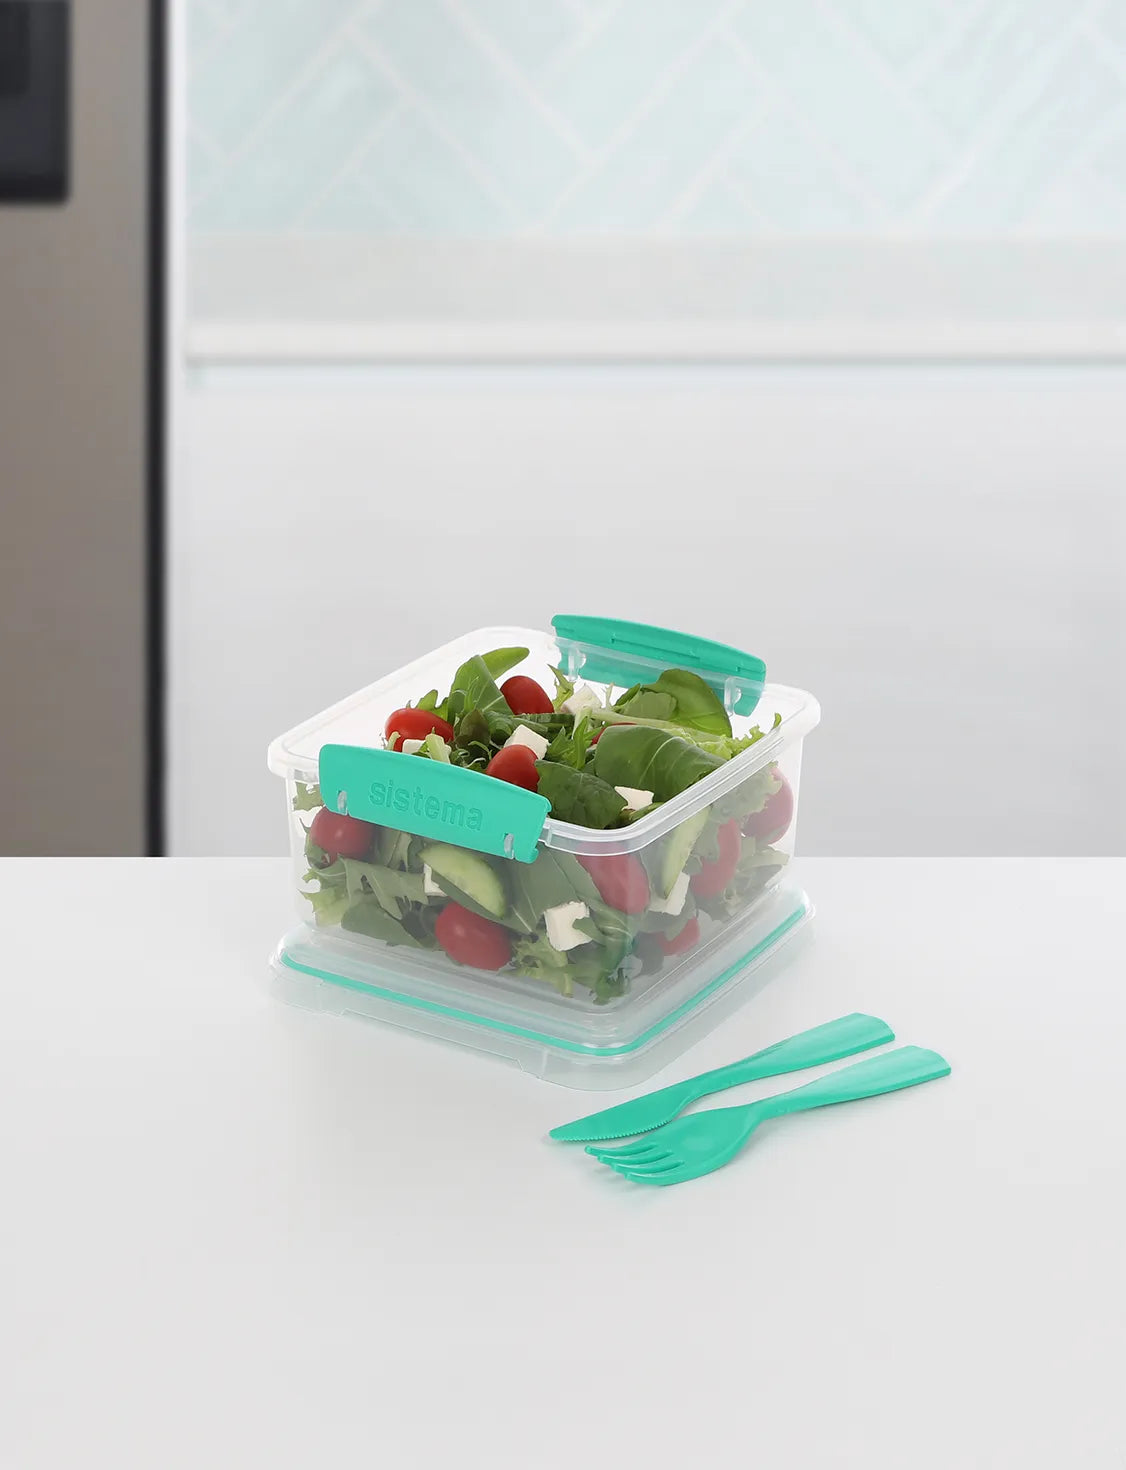 NEW Sistema Salad + Sandwich To Go 1.63L Food Storage Container